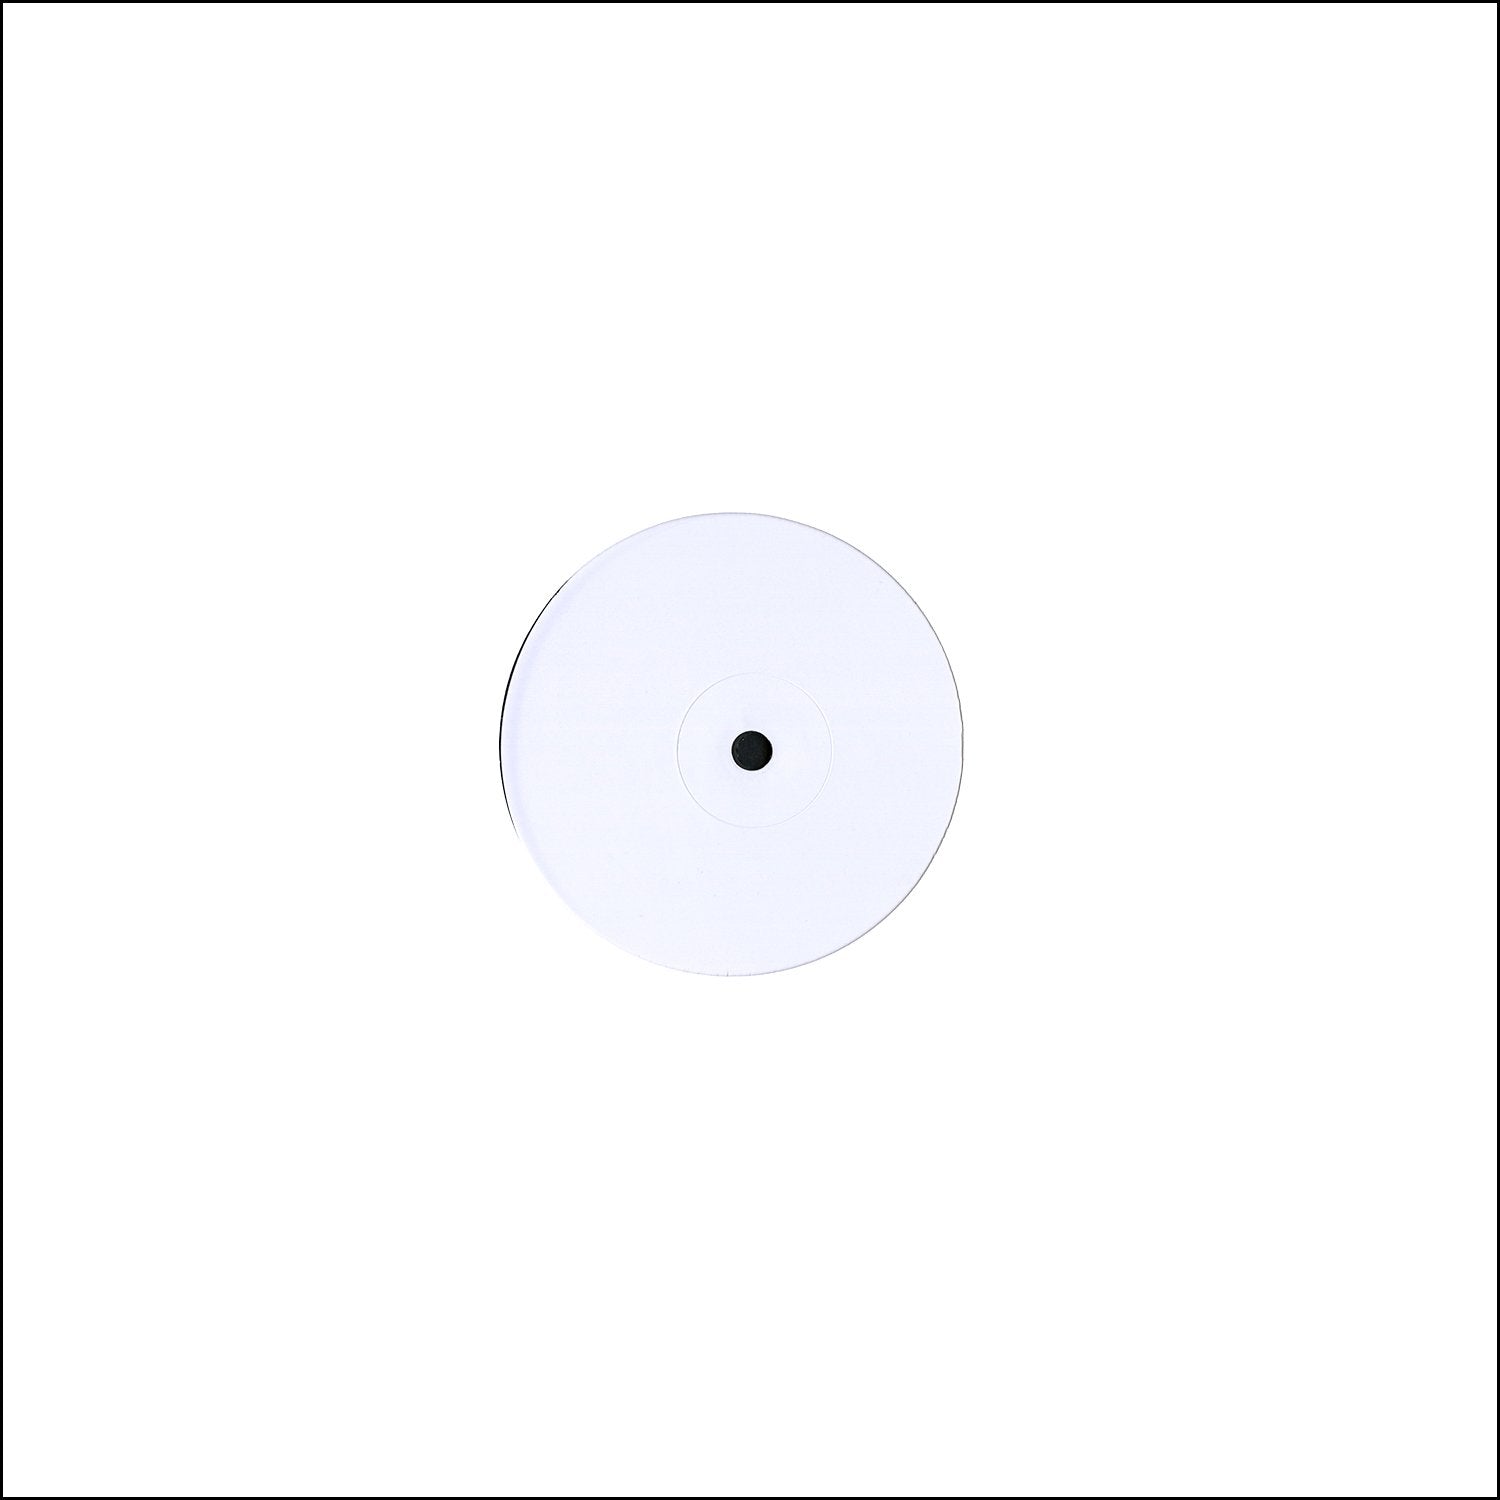 Greatest Other People's Hits [Test Pressing]